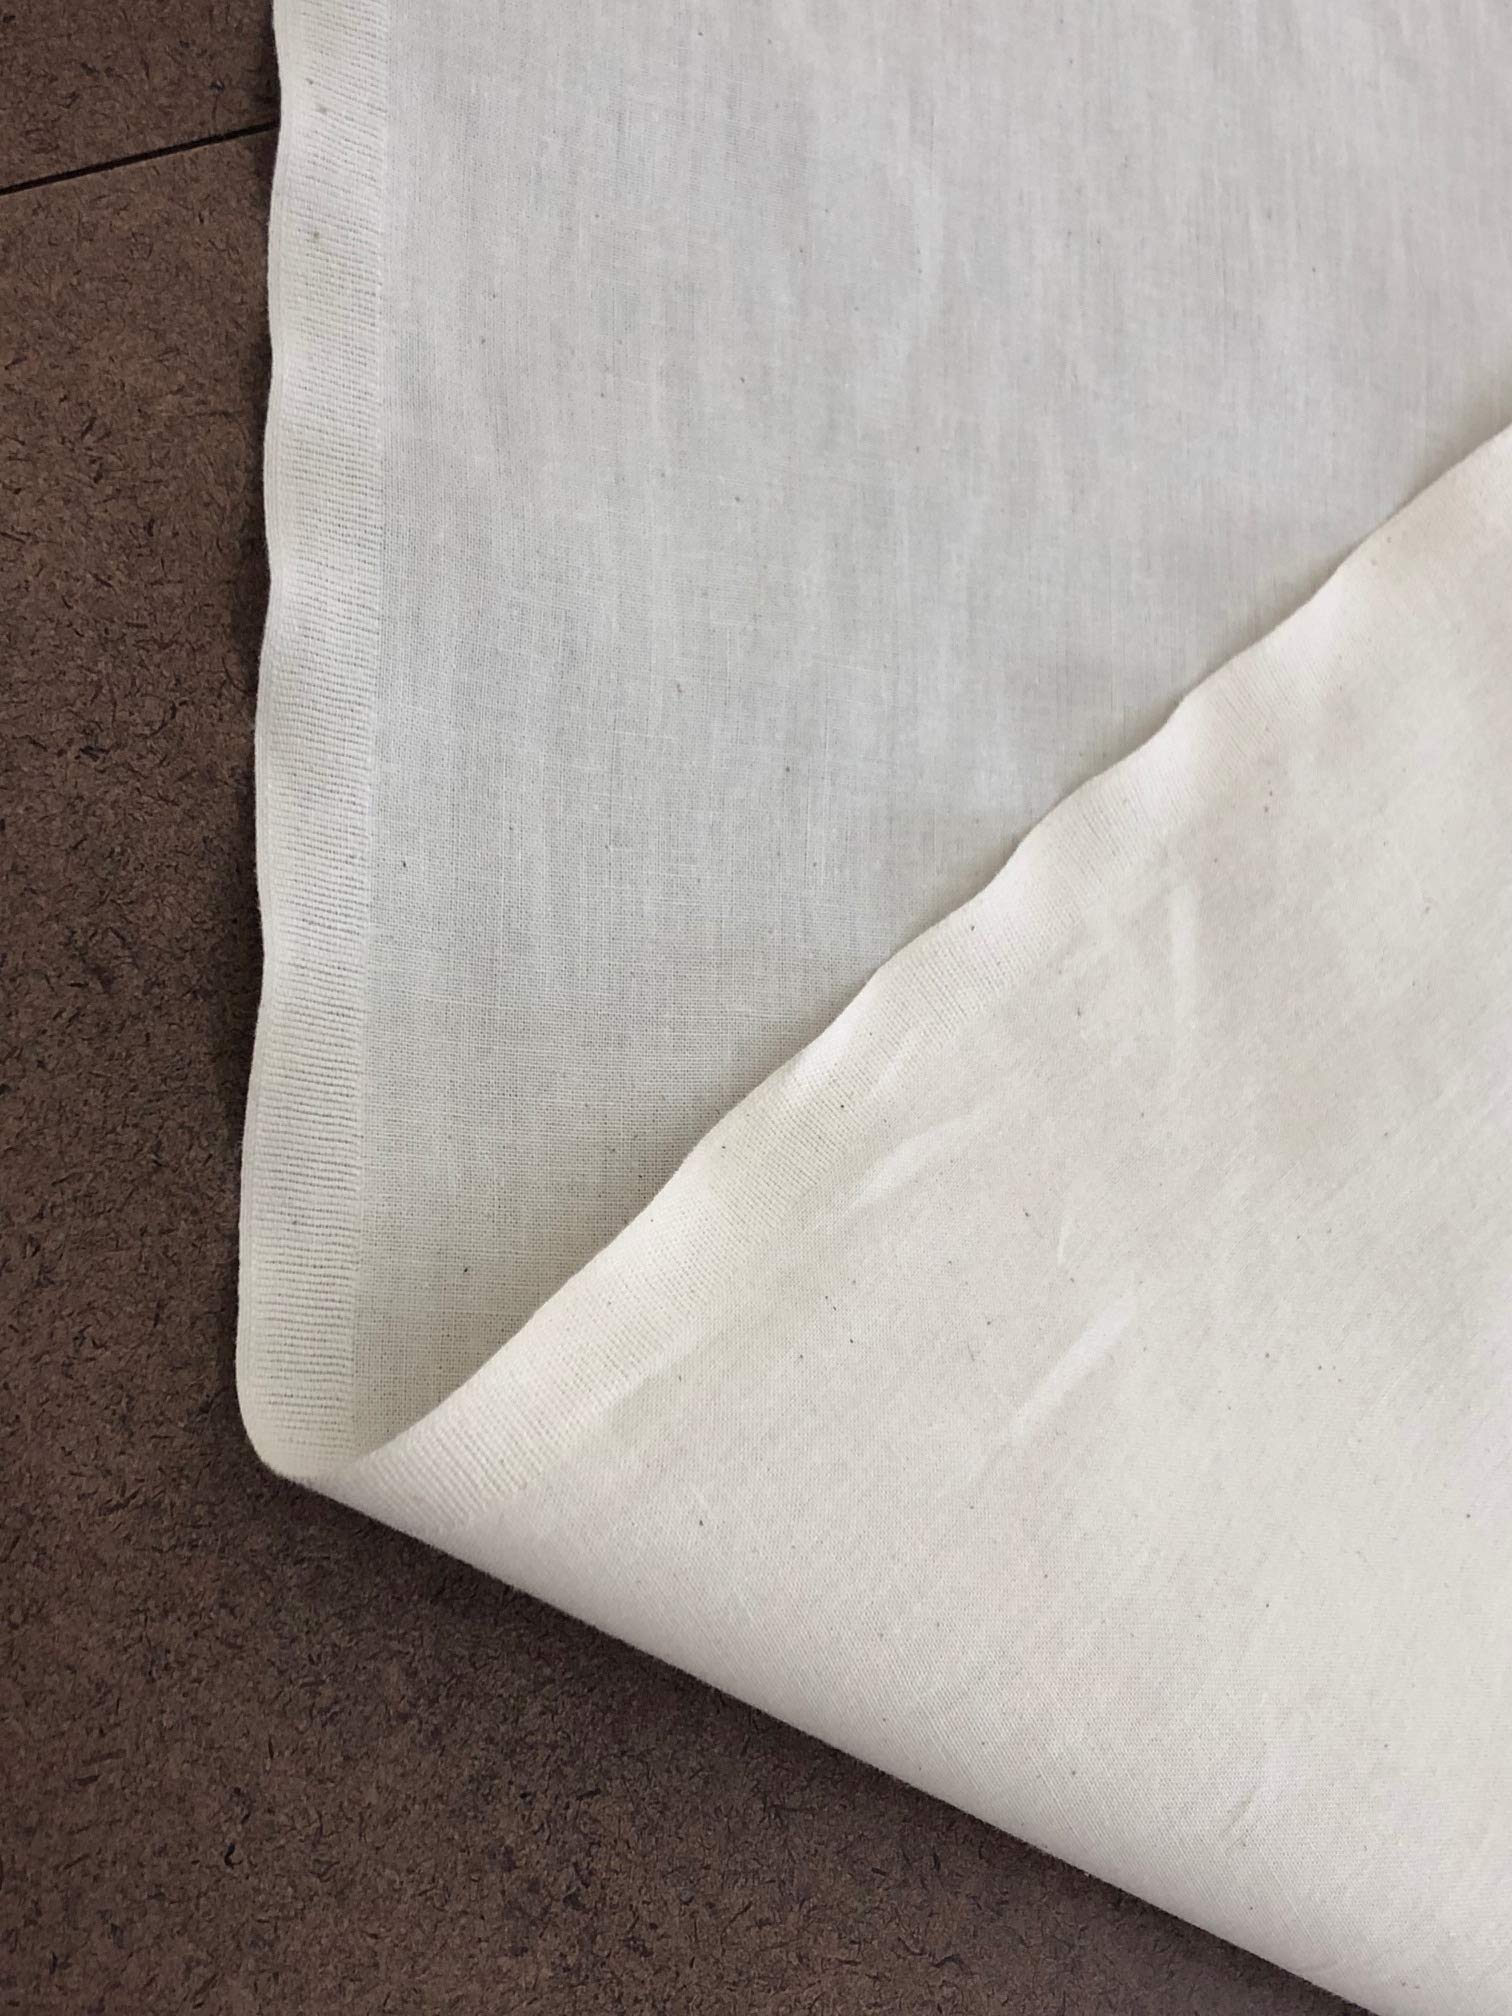 AK TRADING CO. Muslin Fabric/Textile Unbleached - Draping Fabric - Natural 10 Yards Medium Weight - 100% Cotton (63in. Wide), Natural Unbleached